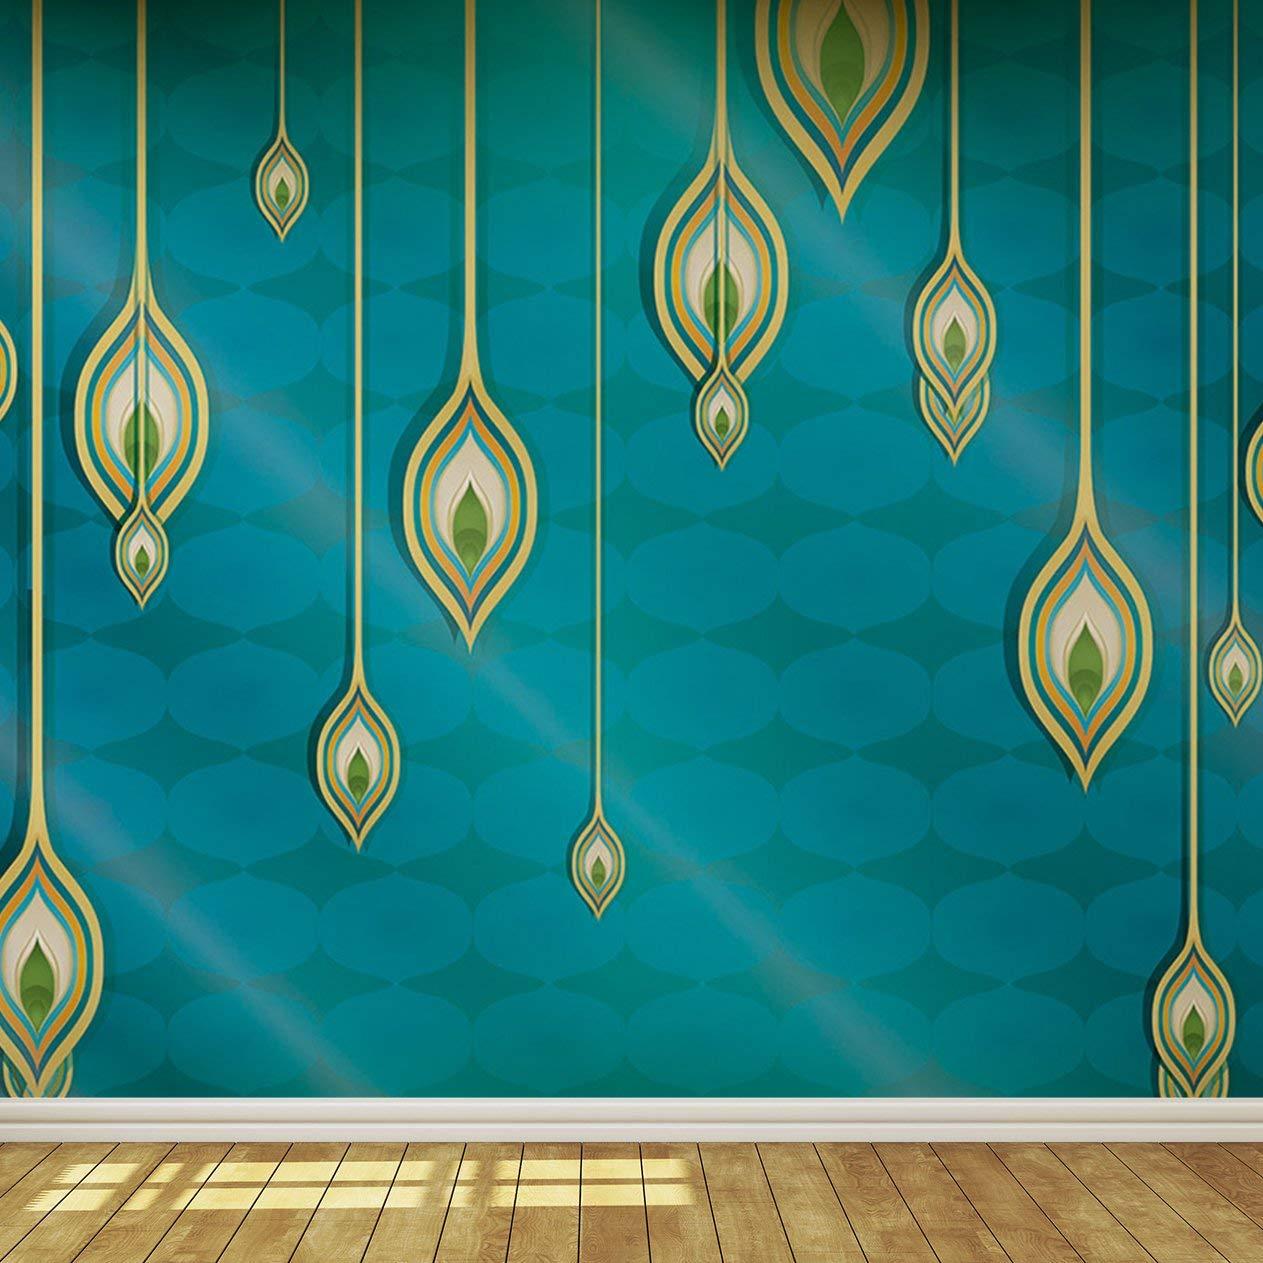 Blue Teal and Gold Exotic Indian Design Wallpaper Mural: Amazon.co